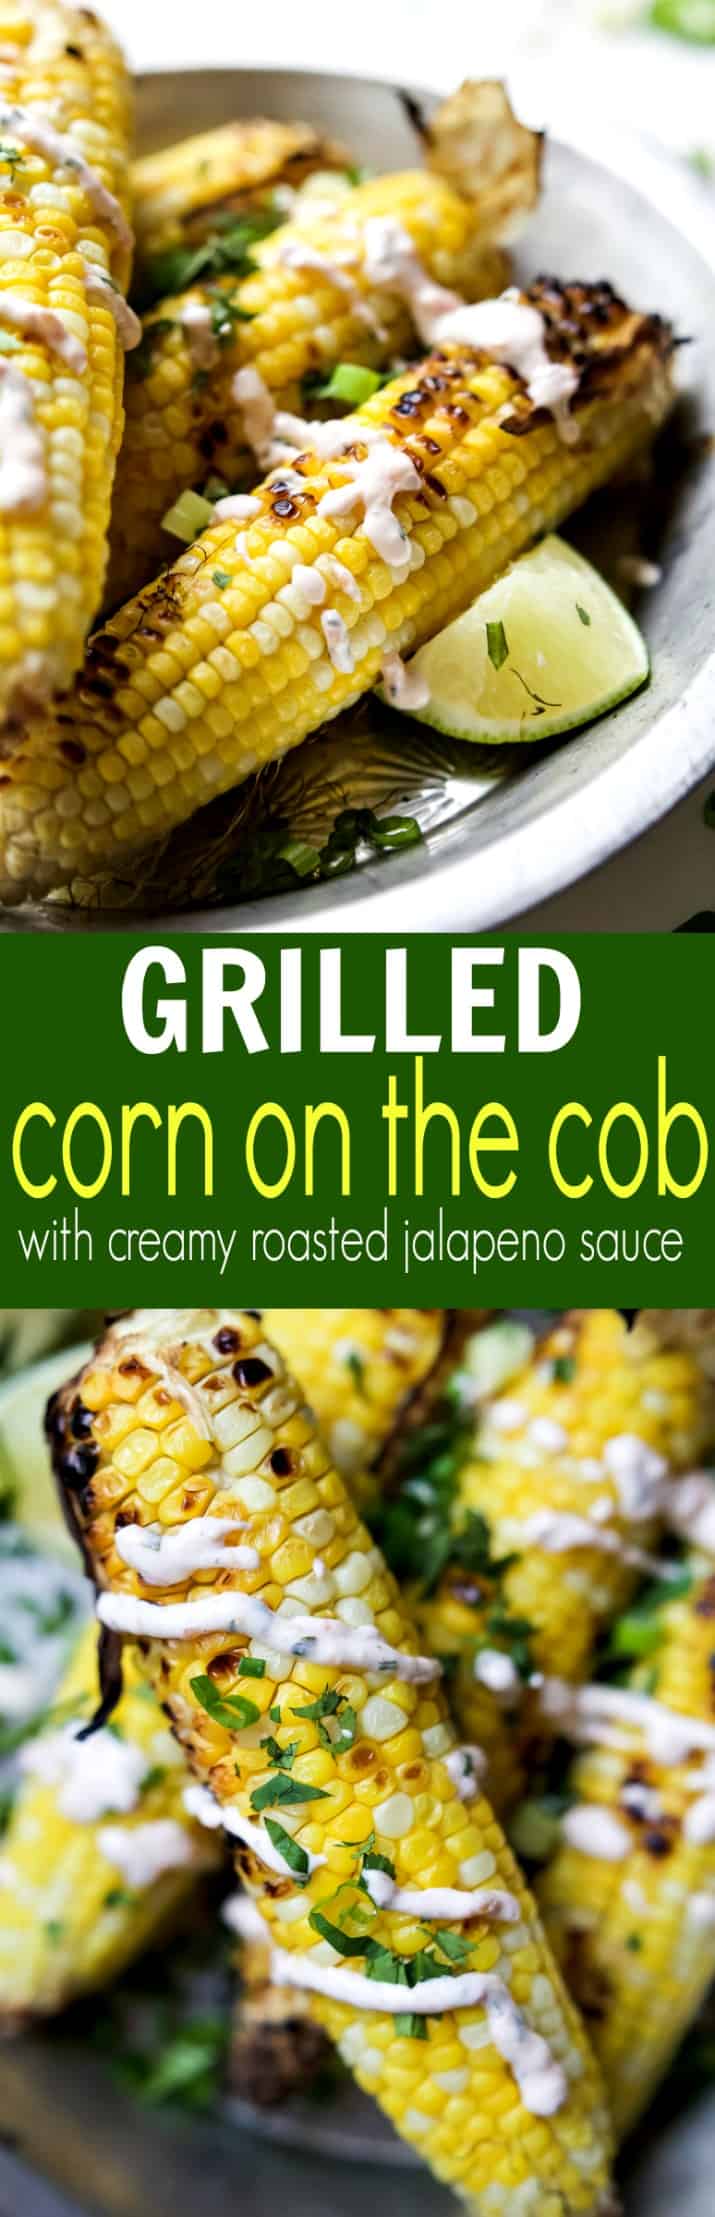 Recipe collage for Grilled Corn on the Cob with Creamy Roasted Jalapeno Sauce